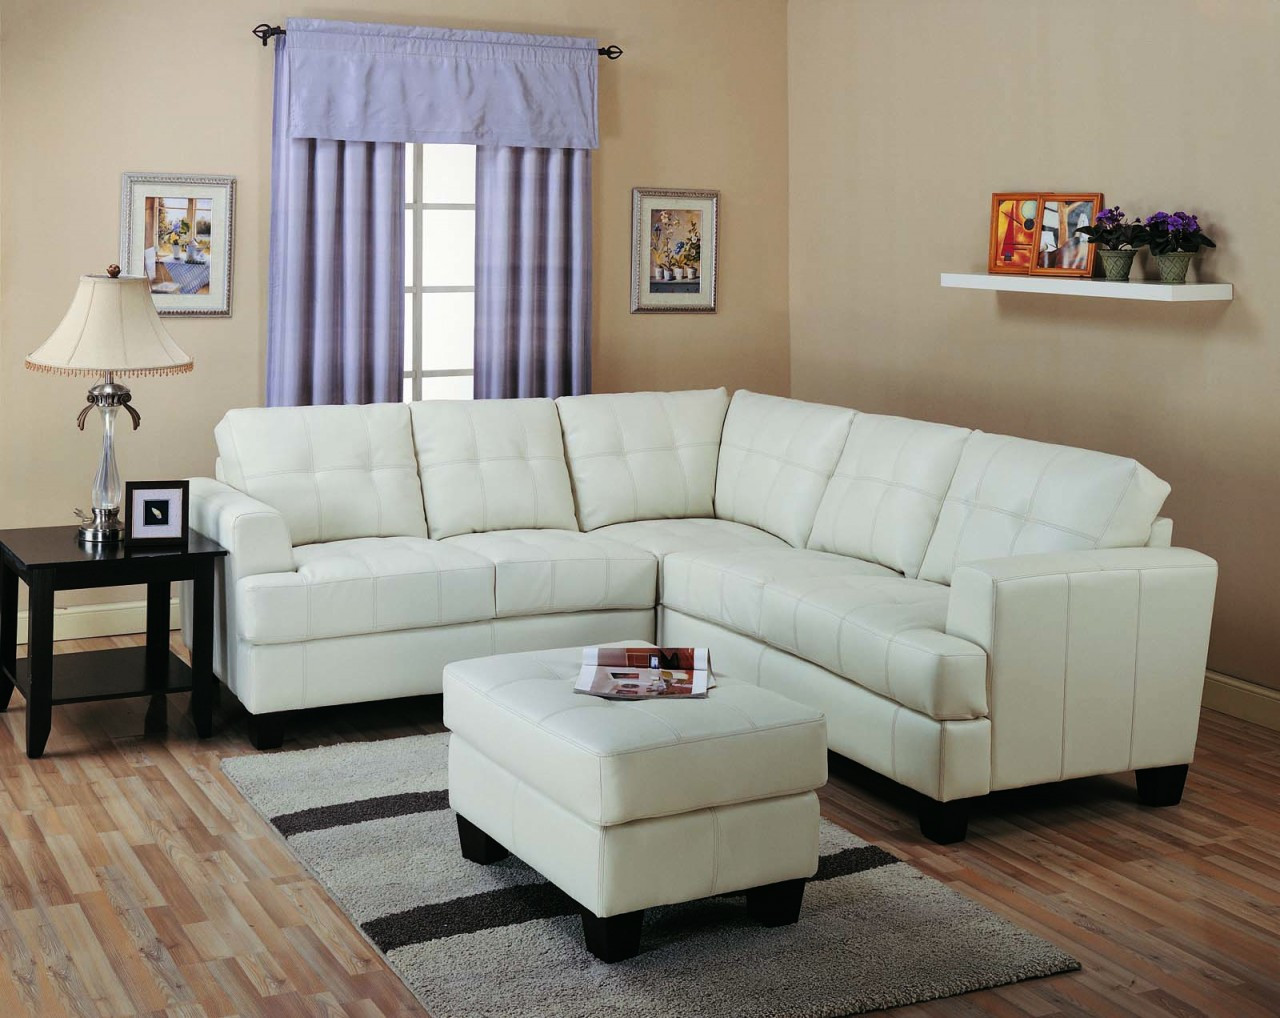 Sofa for Small Living Room Elegant Types Of Best Small Sectional Couches for Small Living